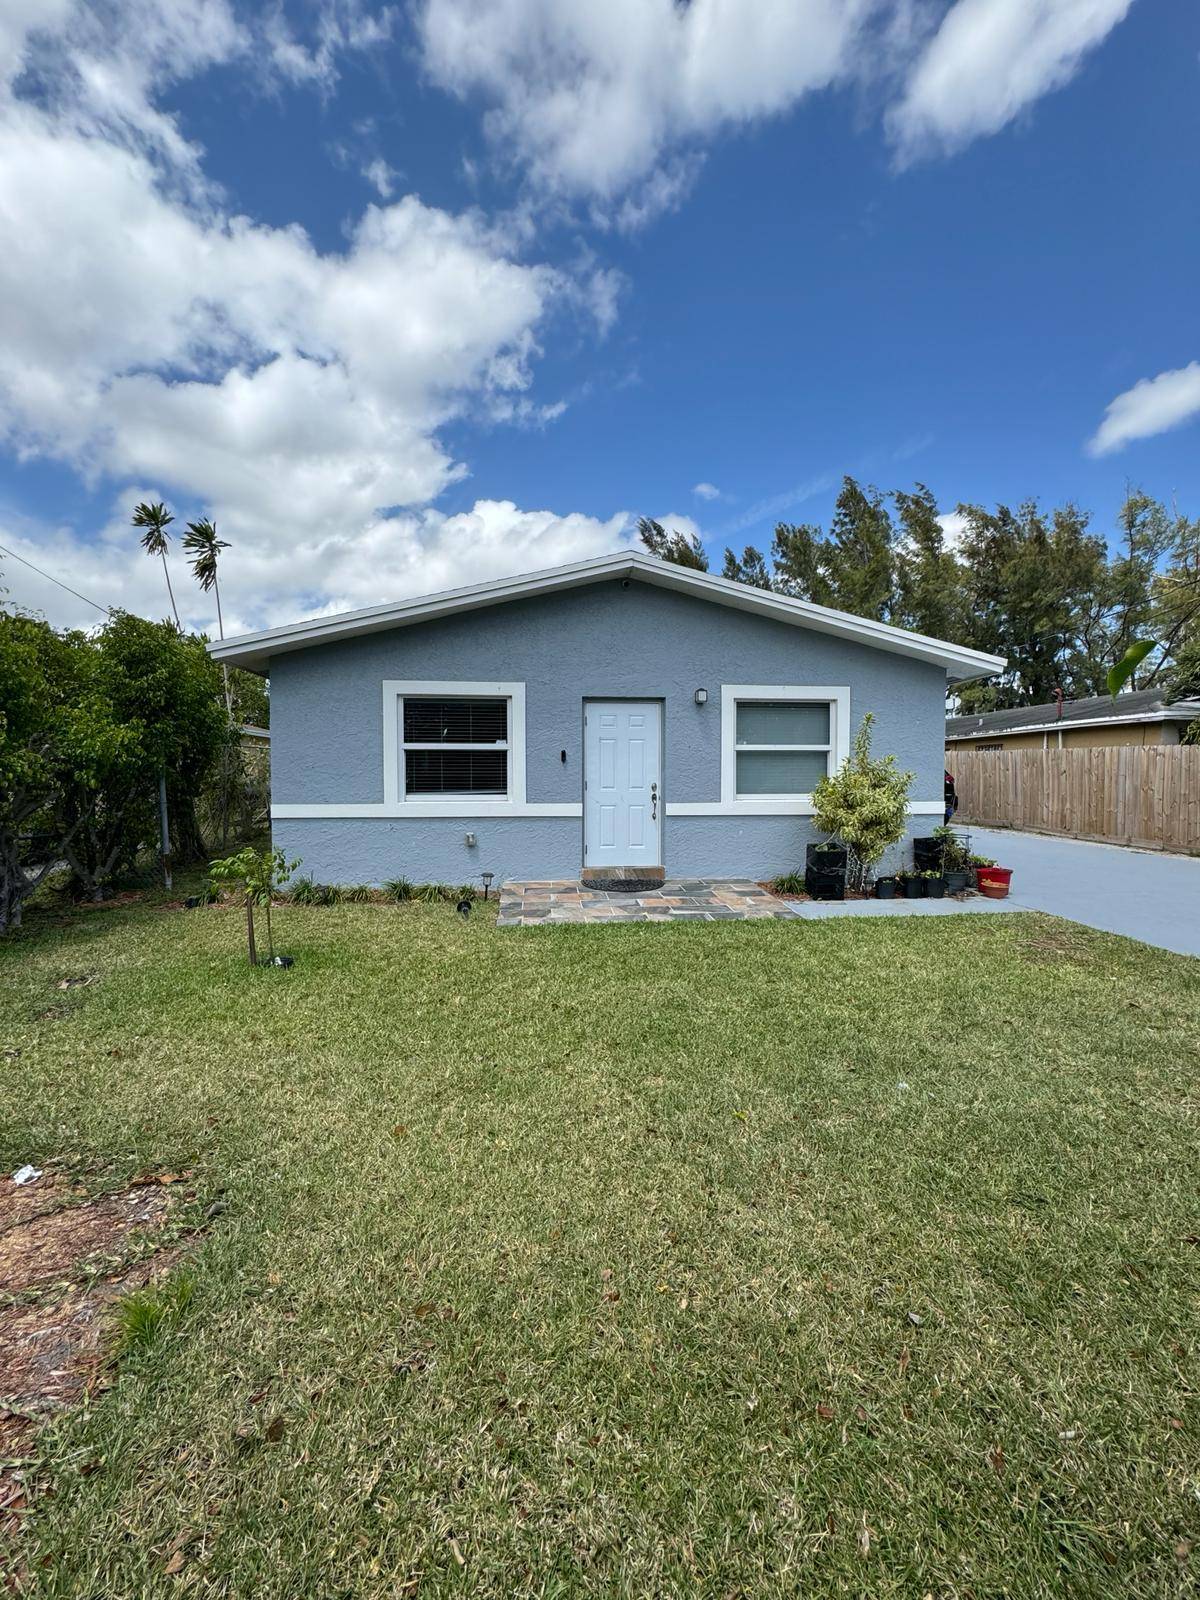 It's an Excellent fully remodeled Single family house with complete hurricane prove windows.